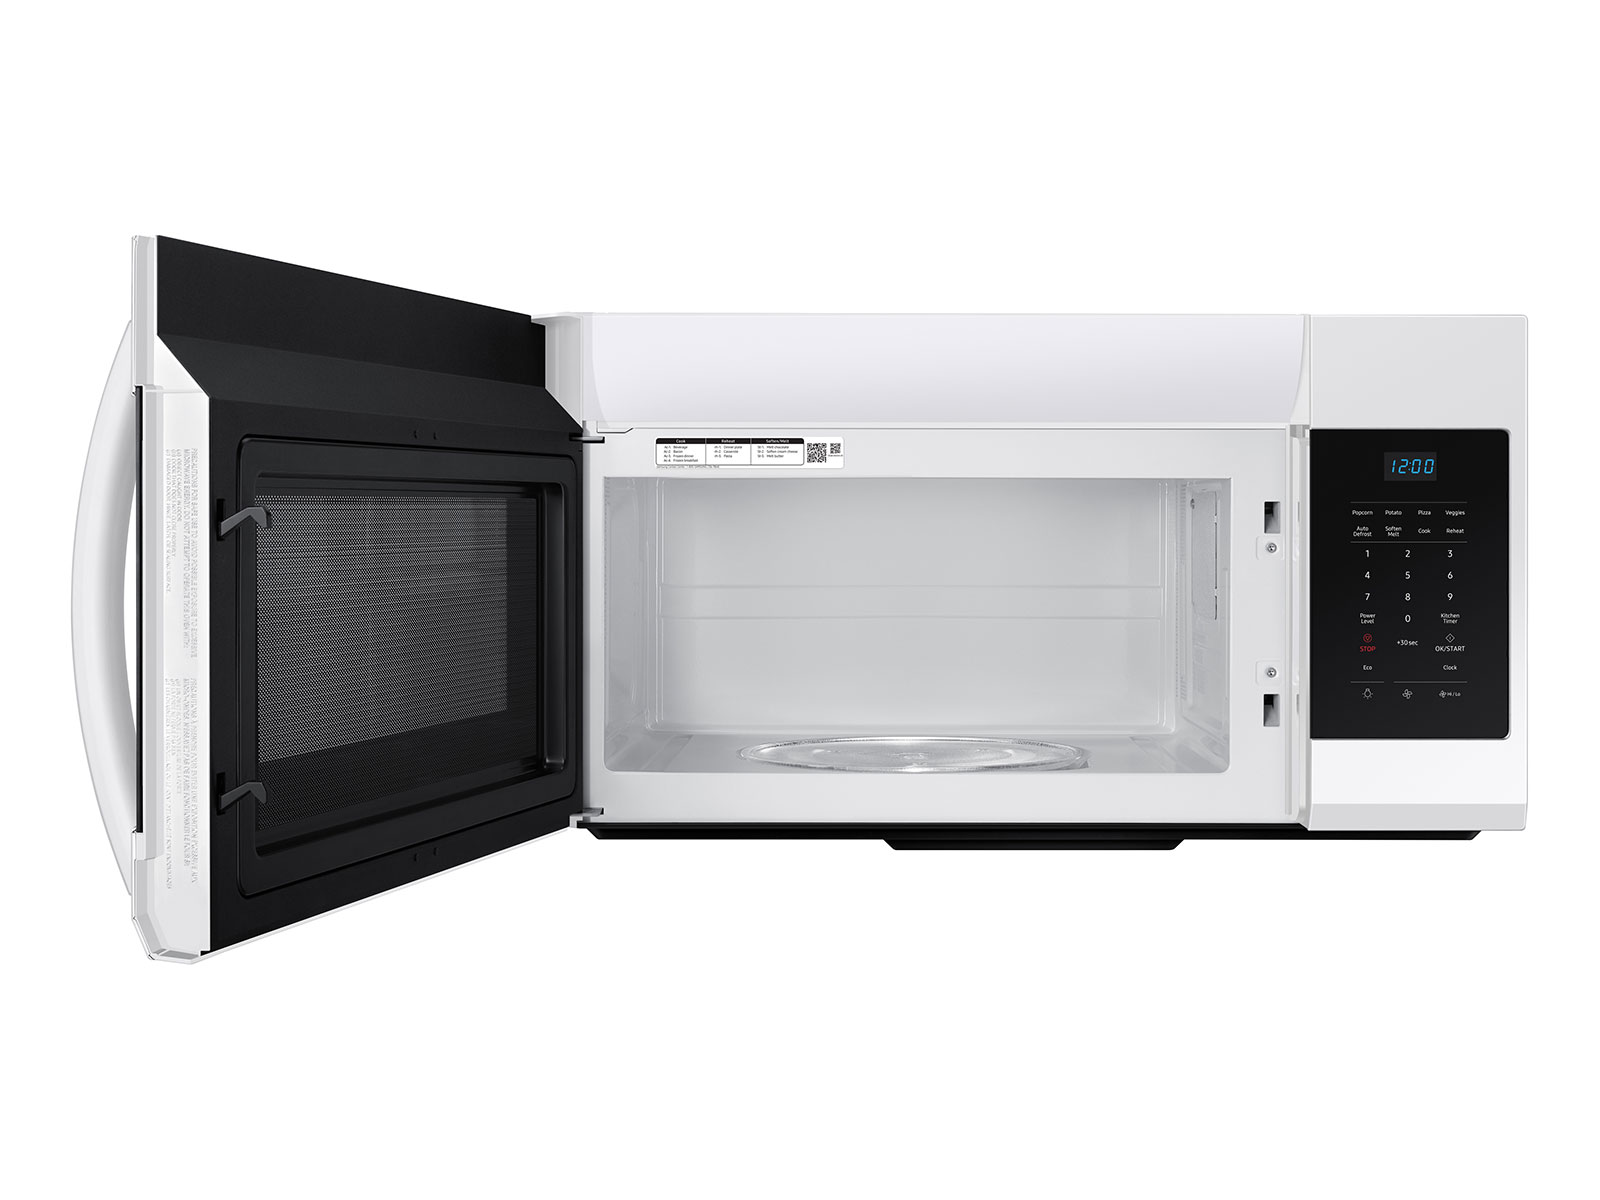 Whirlpool 1.7 Cu. Ft. Over-The-Range, Combination Microwave Oven